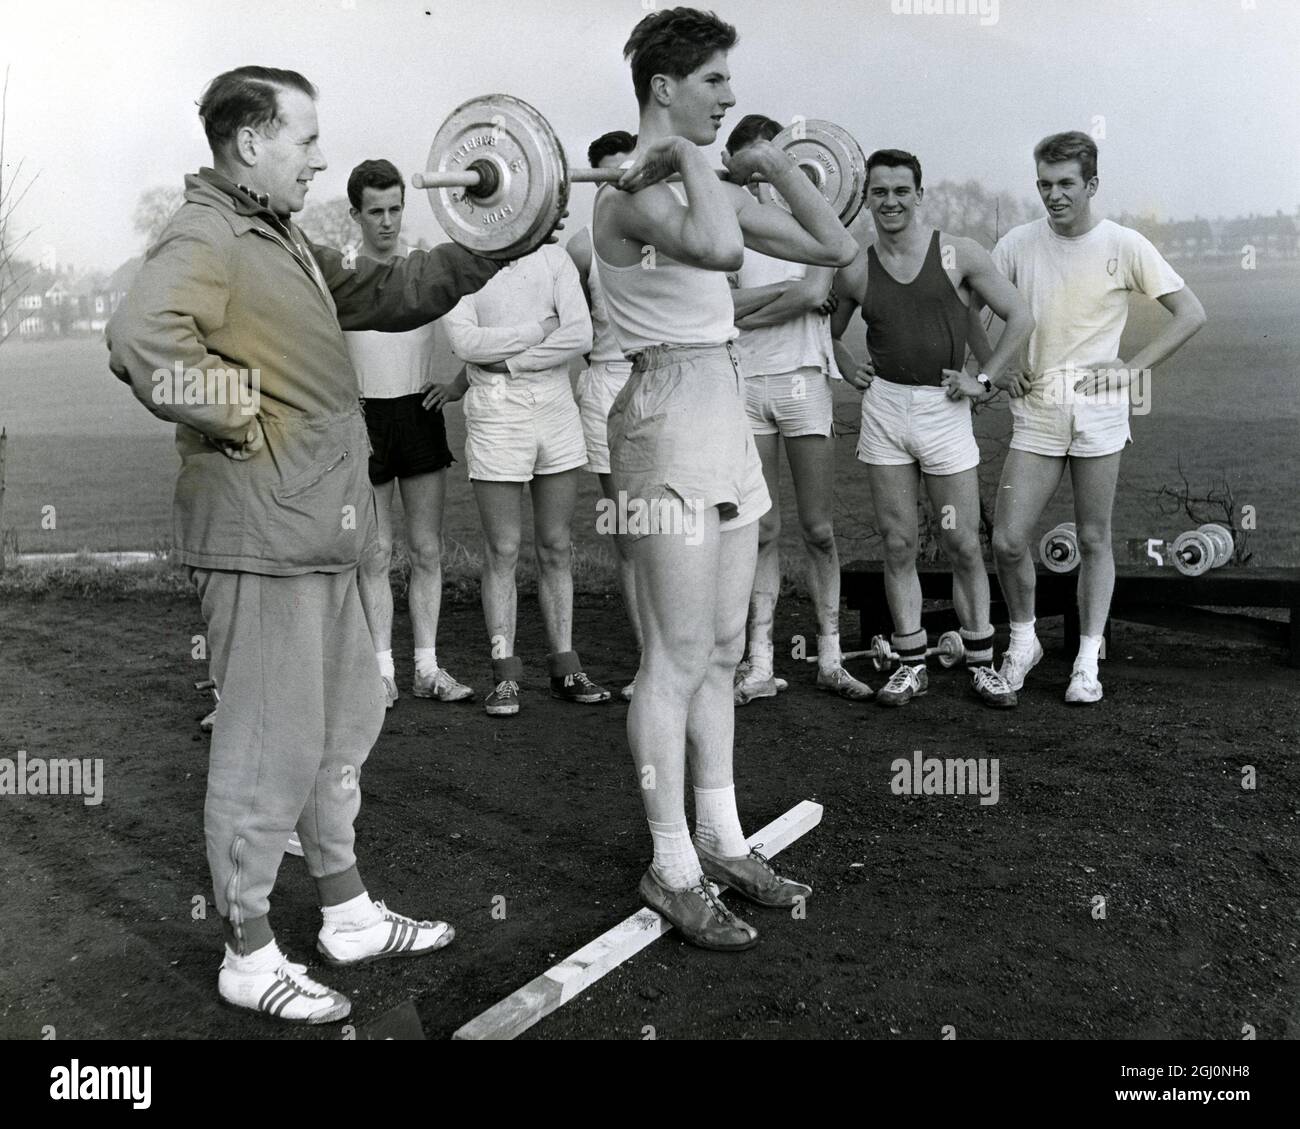 Southern Area AAA coach John Le Masurier of Worcester Park , instructs a group of young athletes at the London University Sports Ground , Motspur Park , Surrey , England . Weight training to his instruction may be seen with 17 year old Clarks College student Tony Tymms of Richmond . 4 January 1961 Stock Photo